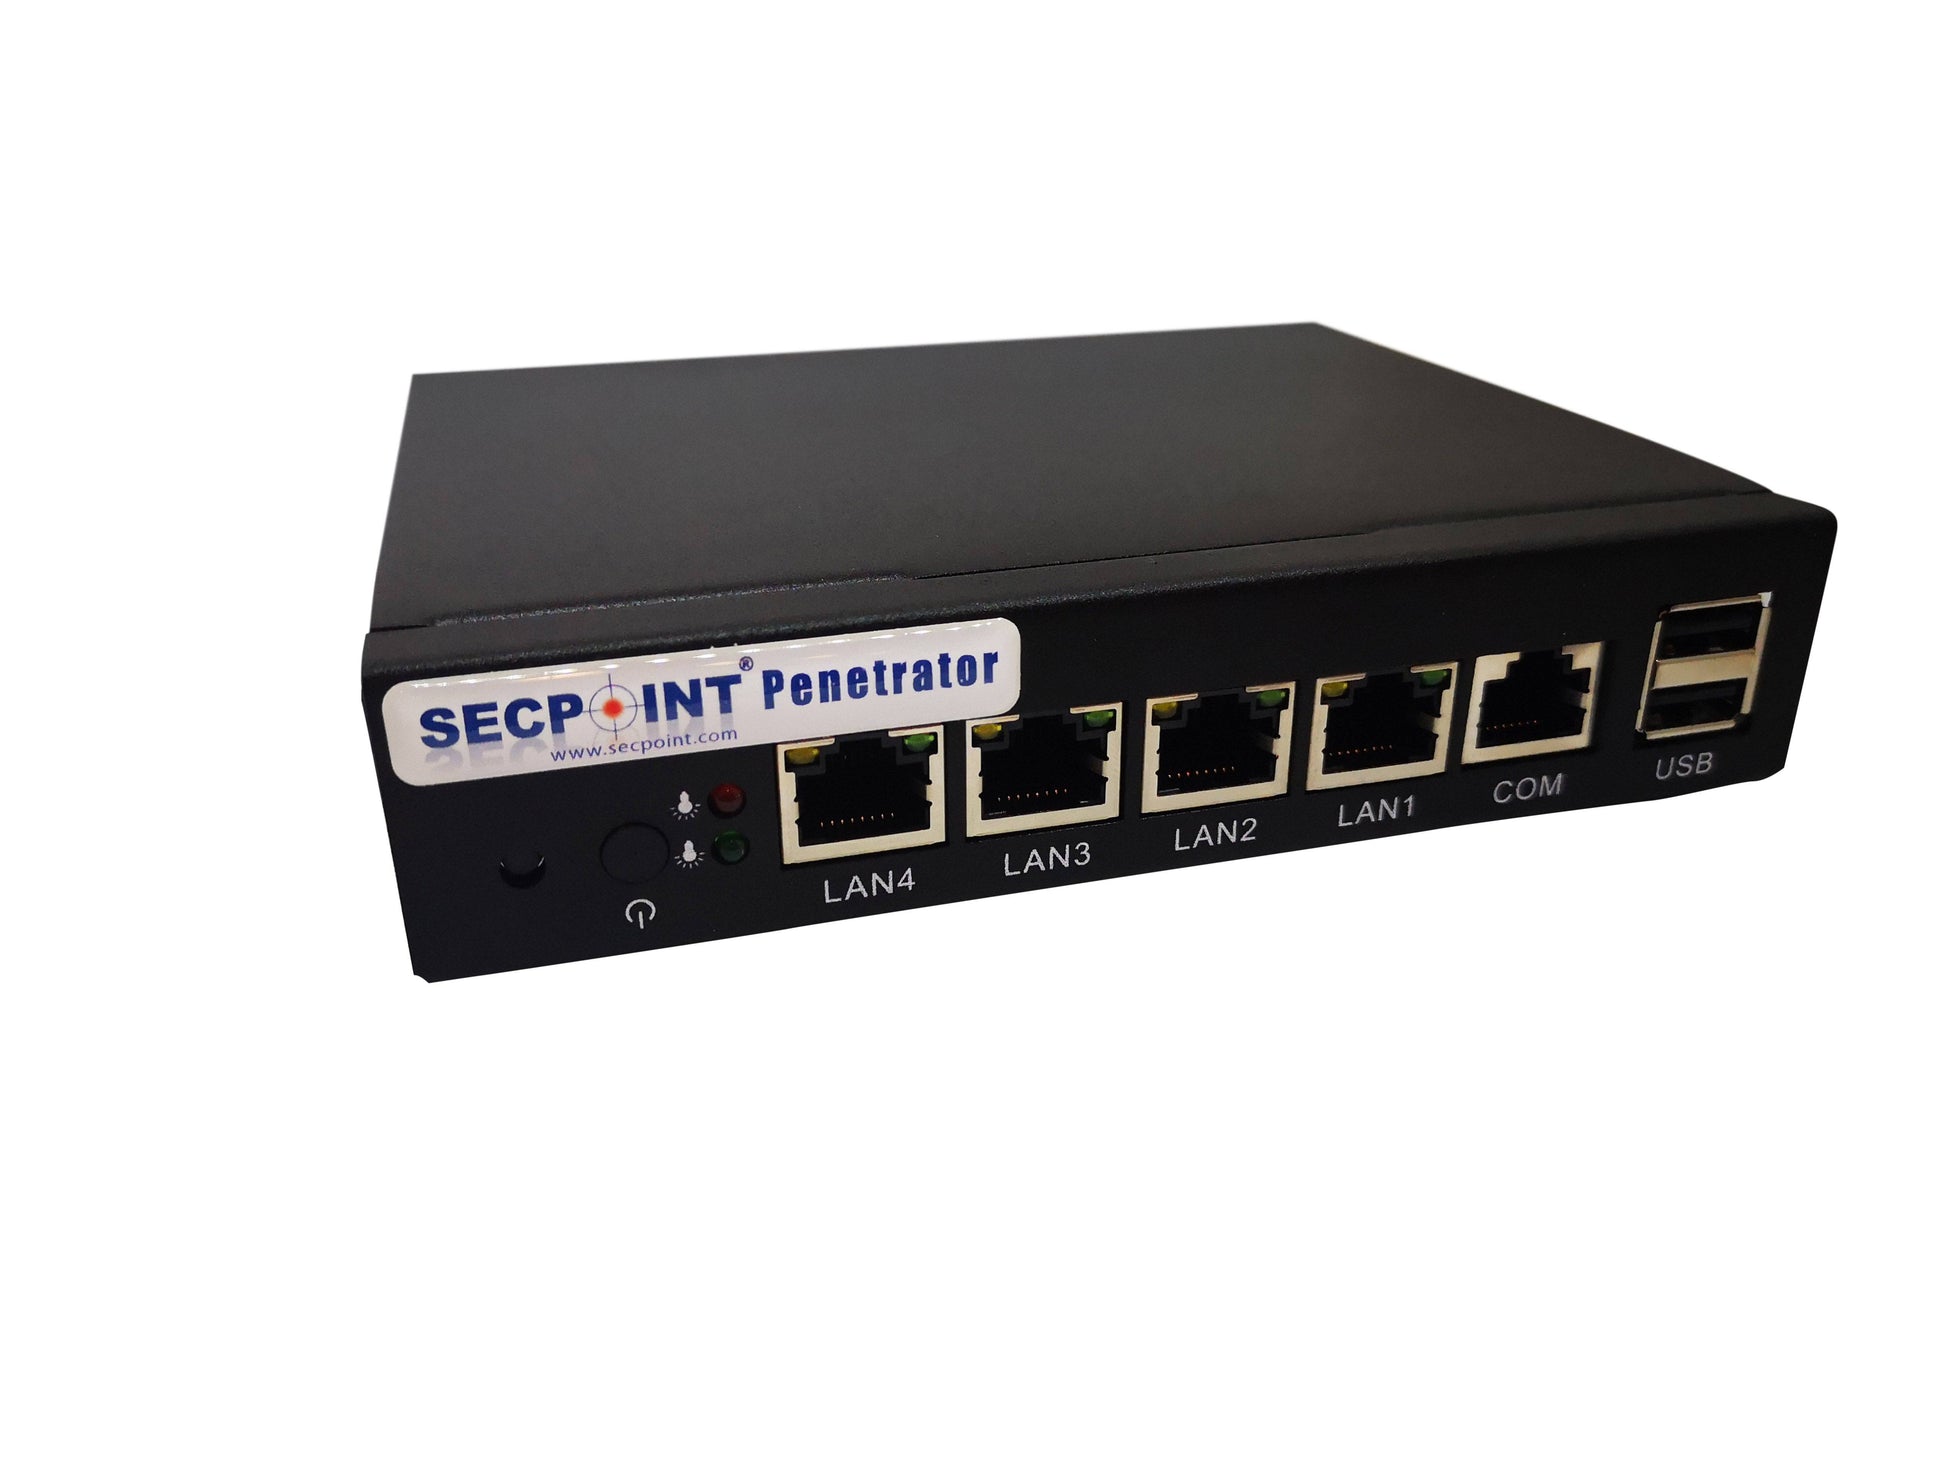 SecPoint Protector P9 - 10 Users Firewall Appliance (1 Year License) SFF - SecPoint